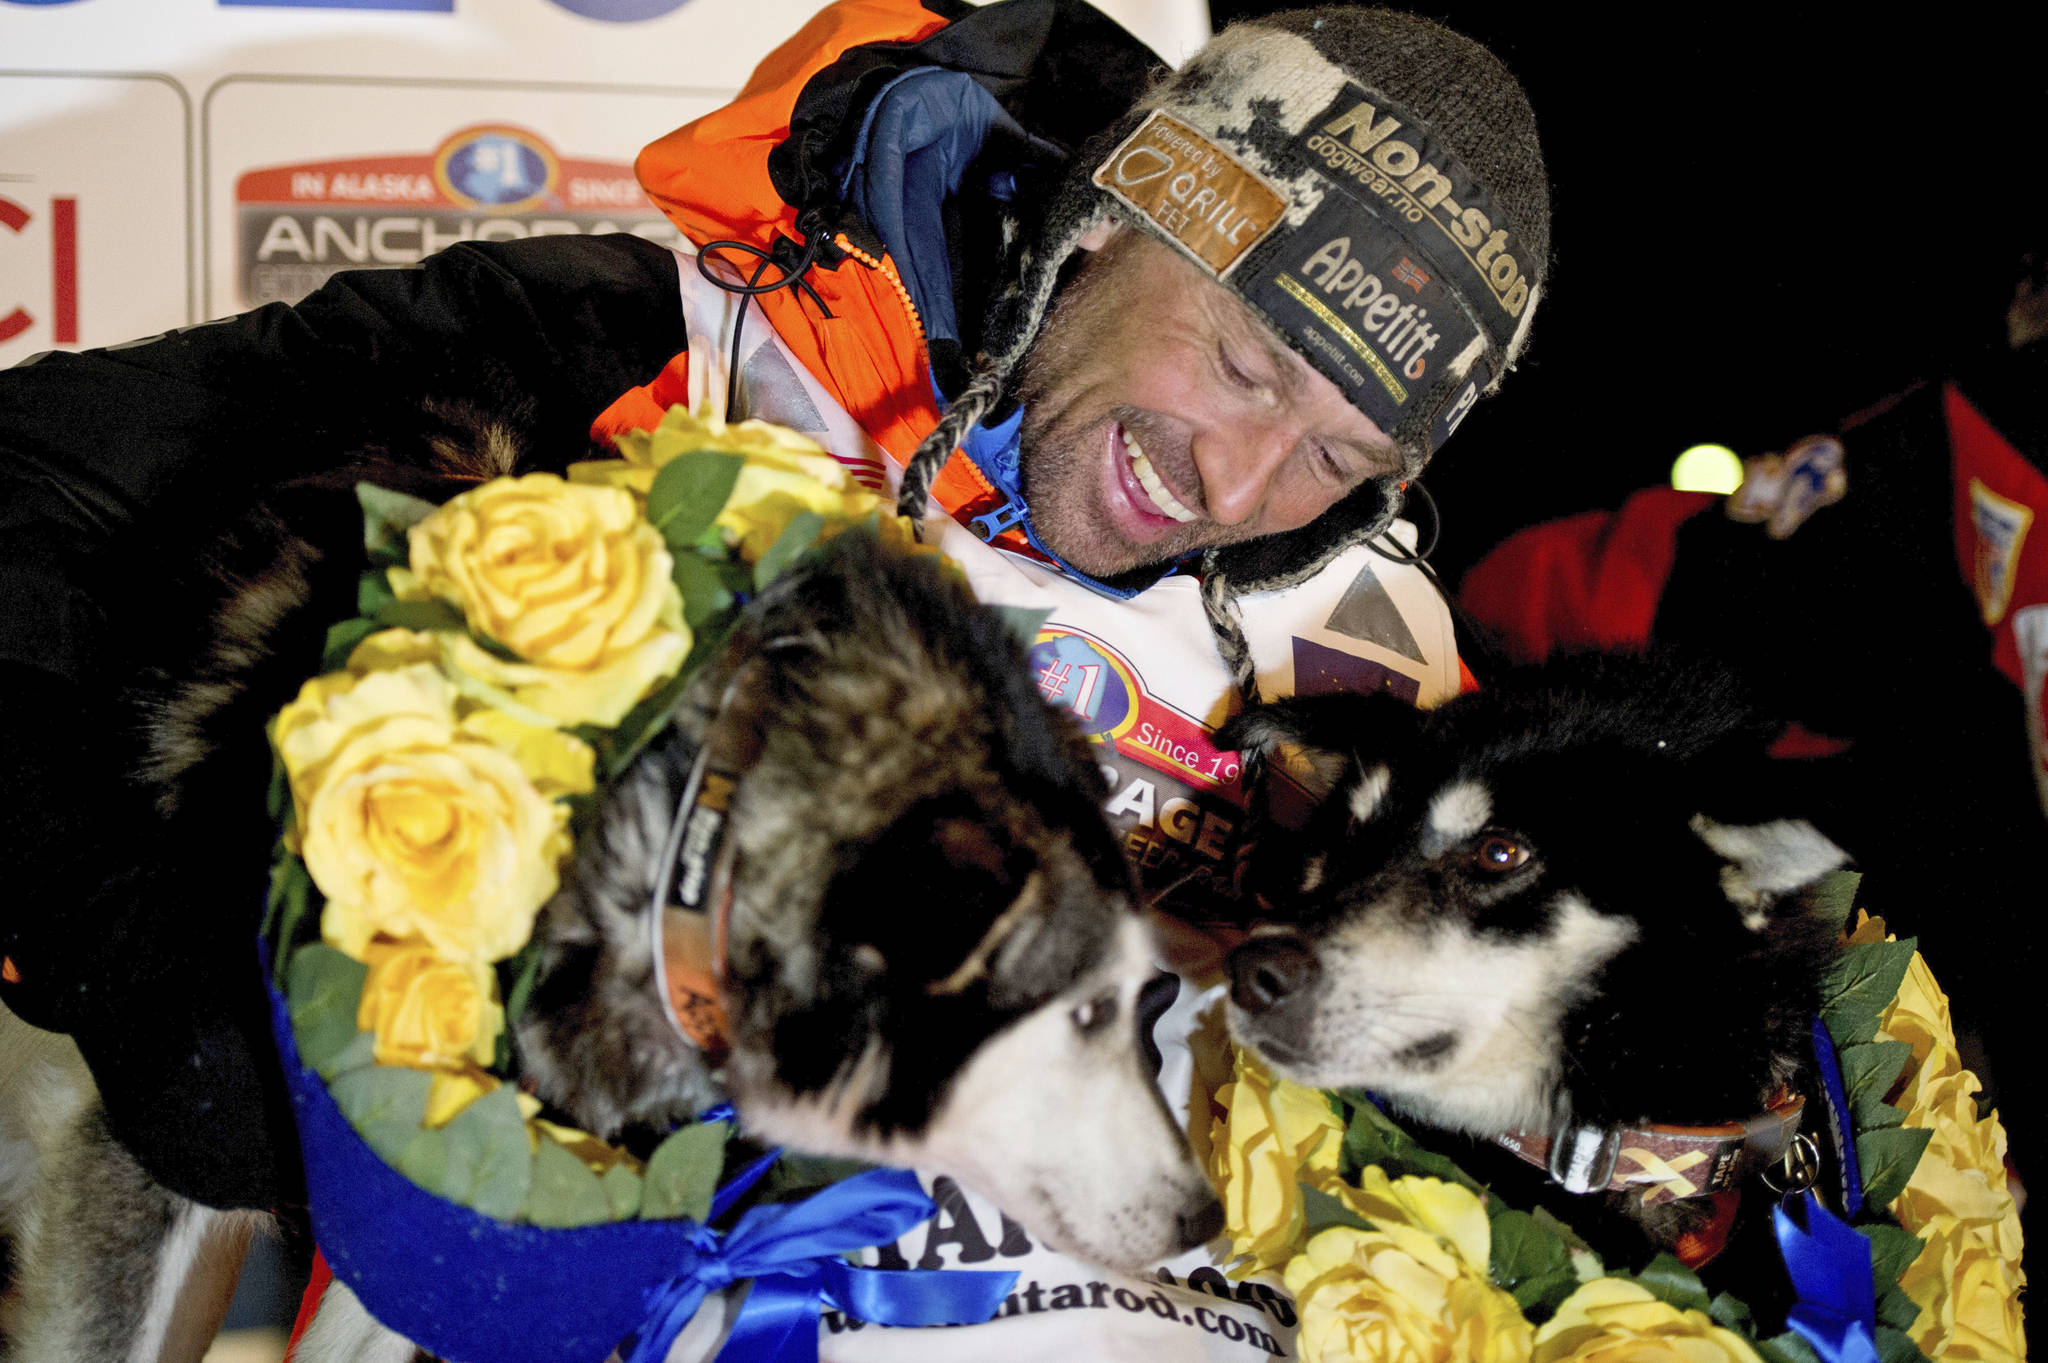 In this March 18, 2020 file photo, Thomas Waerner, of Norway, celebrates his win in the Iditarod Trail Sled Dog Race in Nome, Alaska. The world’s most famous sled dog race will go forward in 2021 officials are preparing for every potential contingency now for what the coronavirus and the world might look like in March when the Iditarod starts. It’s not the mushers that worry Iditarod CEO Rob Urbach; they’re used to social distancing along the 1,000 mile trail. The headaches start with what to do with hundreds of volunteers needed to run the race, some scattered in villages along the trail between Anchorage and Nome, to protect them and the village populations. (Marc Lester/Anchorage Daily News via AP, File)